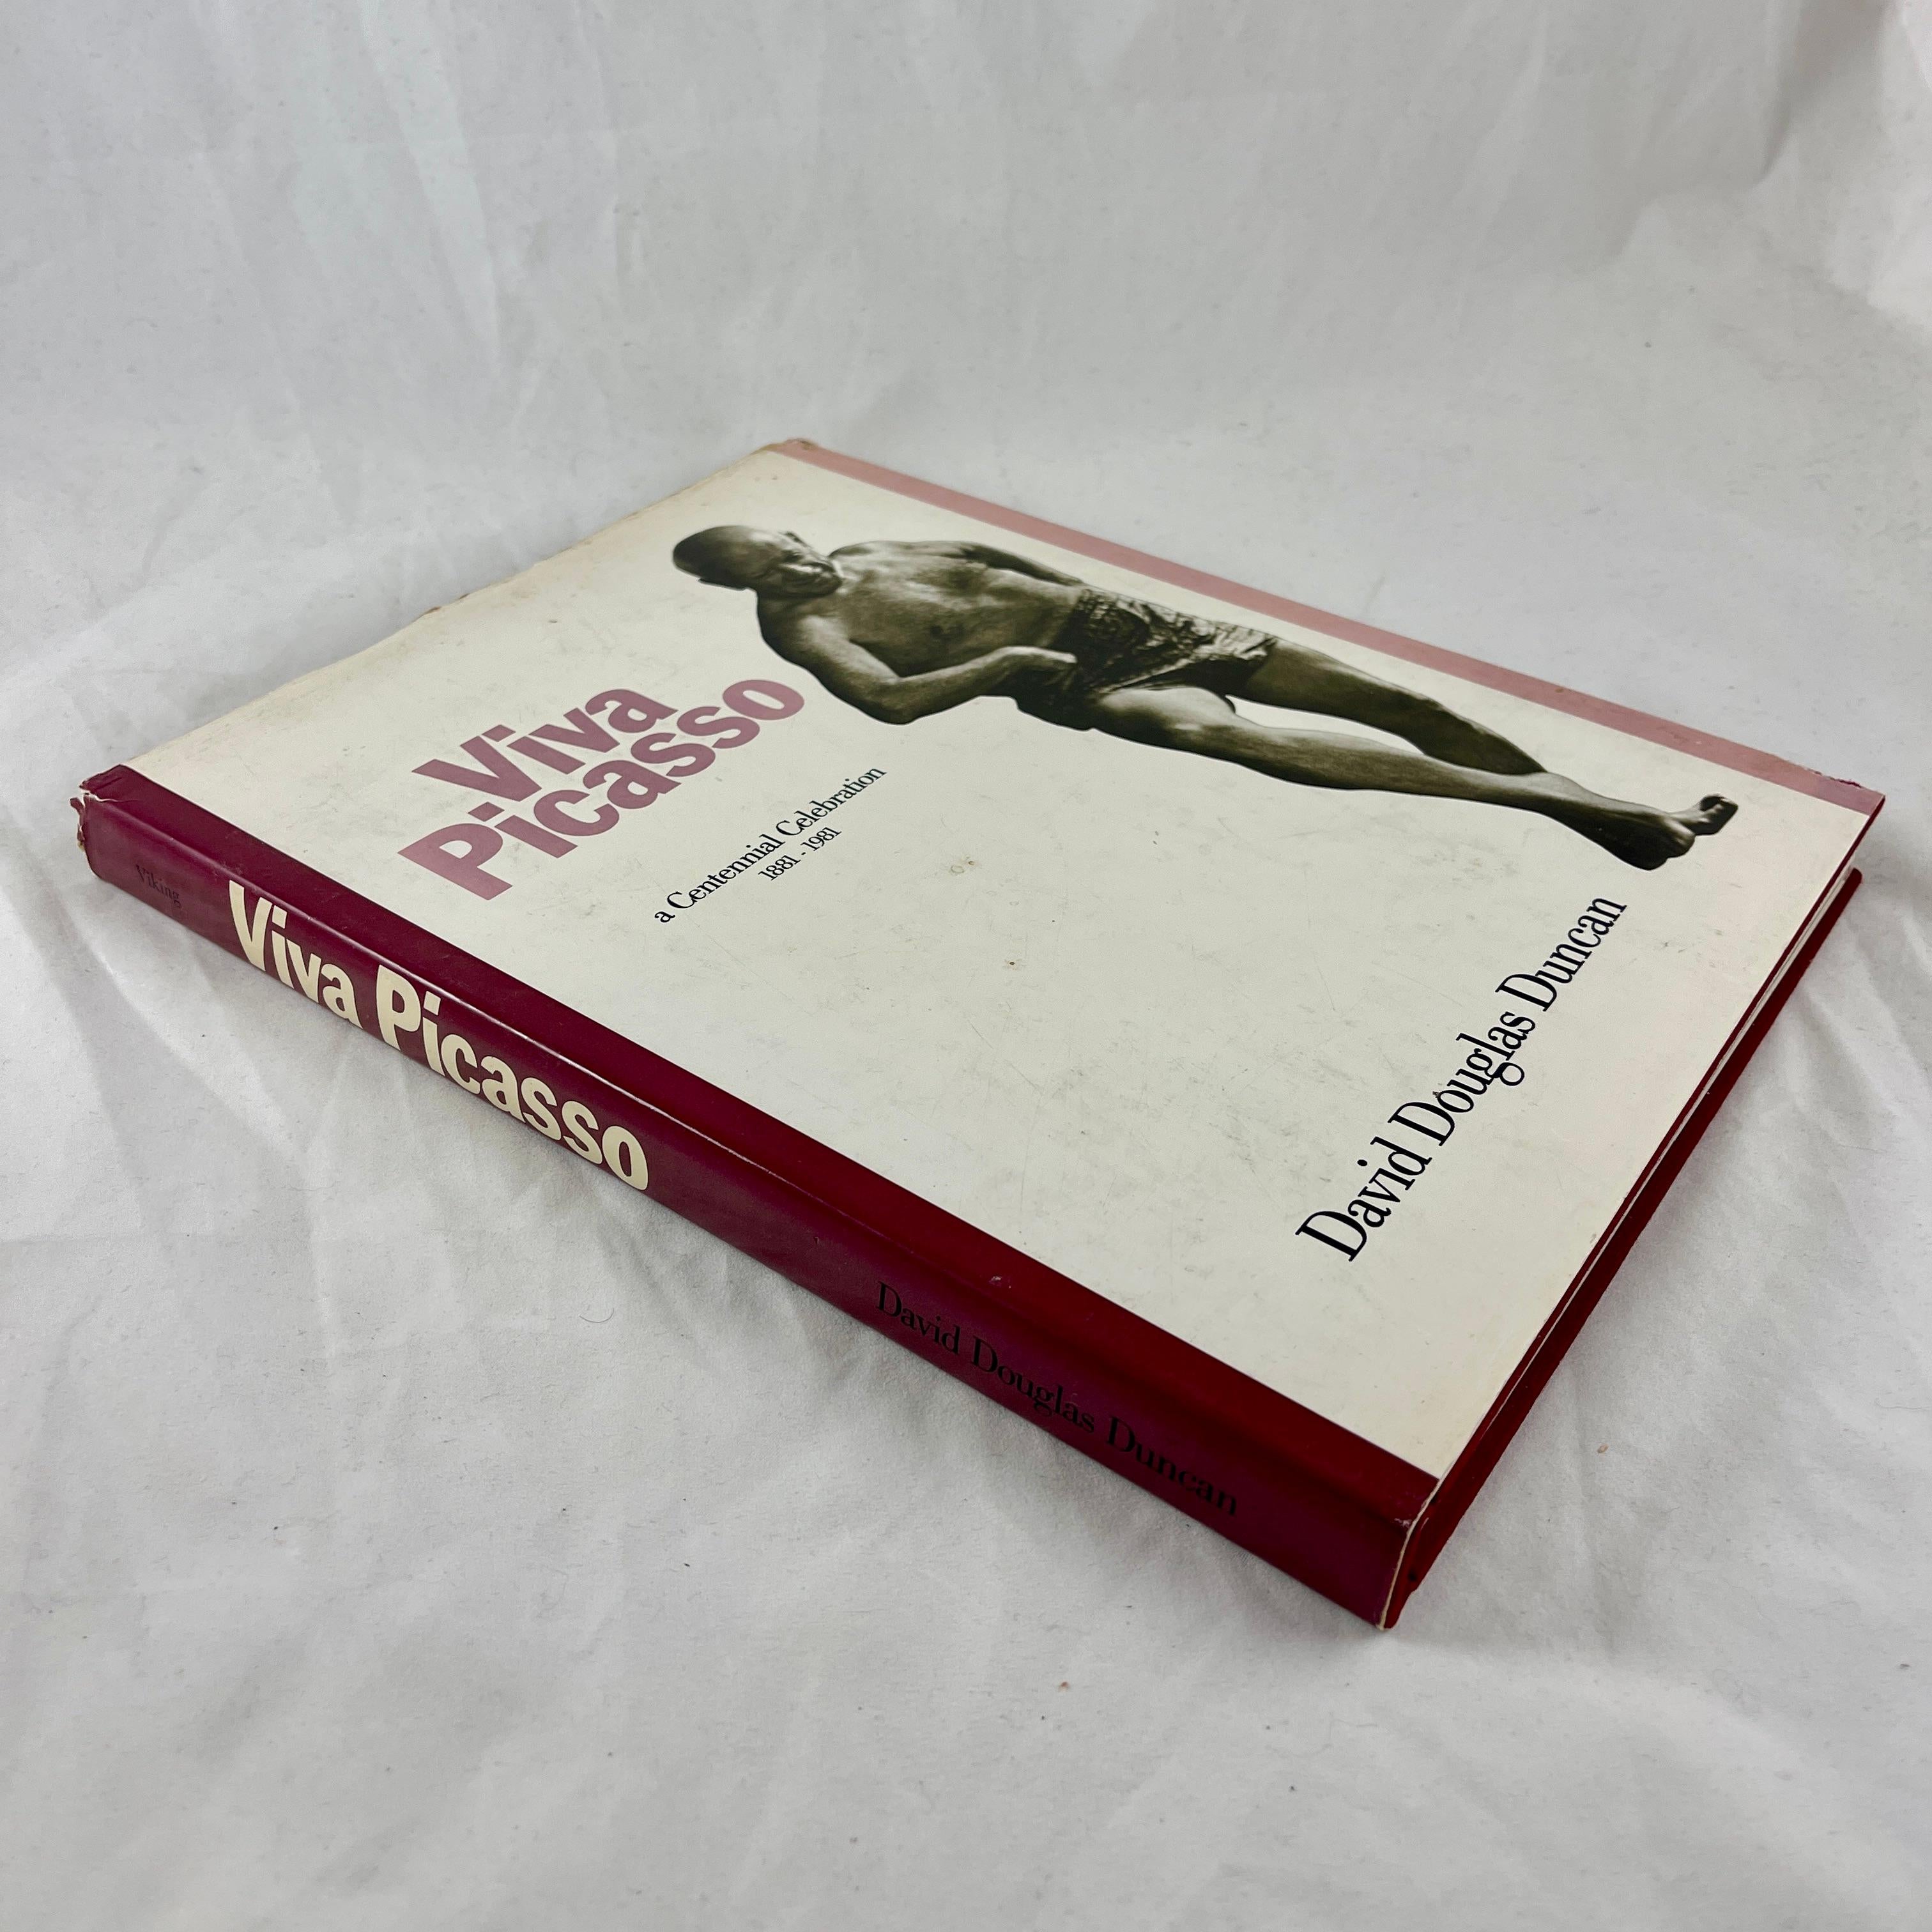 American Viva Picasso: a Centennial Celebration 1881-1981 Hardcover Book with Jacket For Sale